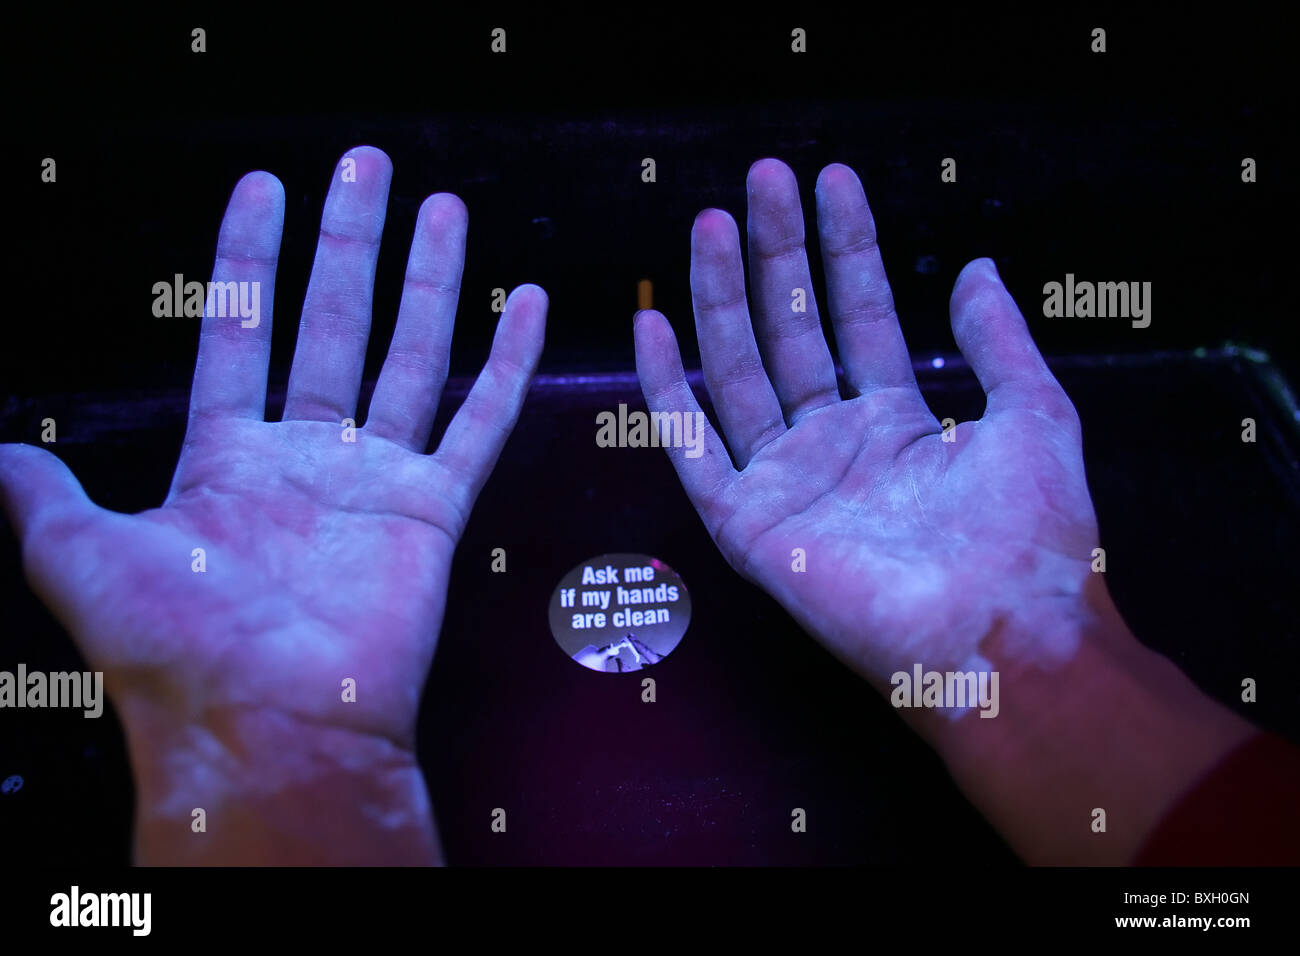 Hands placed under a UV light source indicate how effective normal hand-washing has been. Dark areas indicate missed areas. Stock Photo